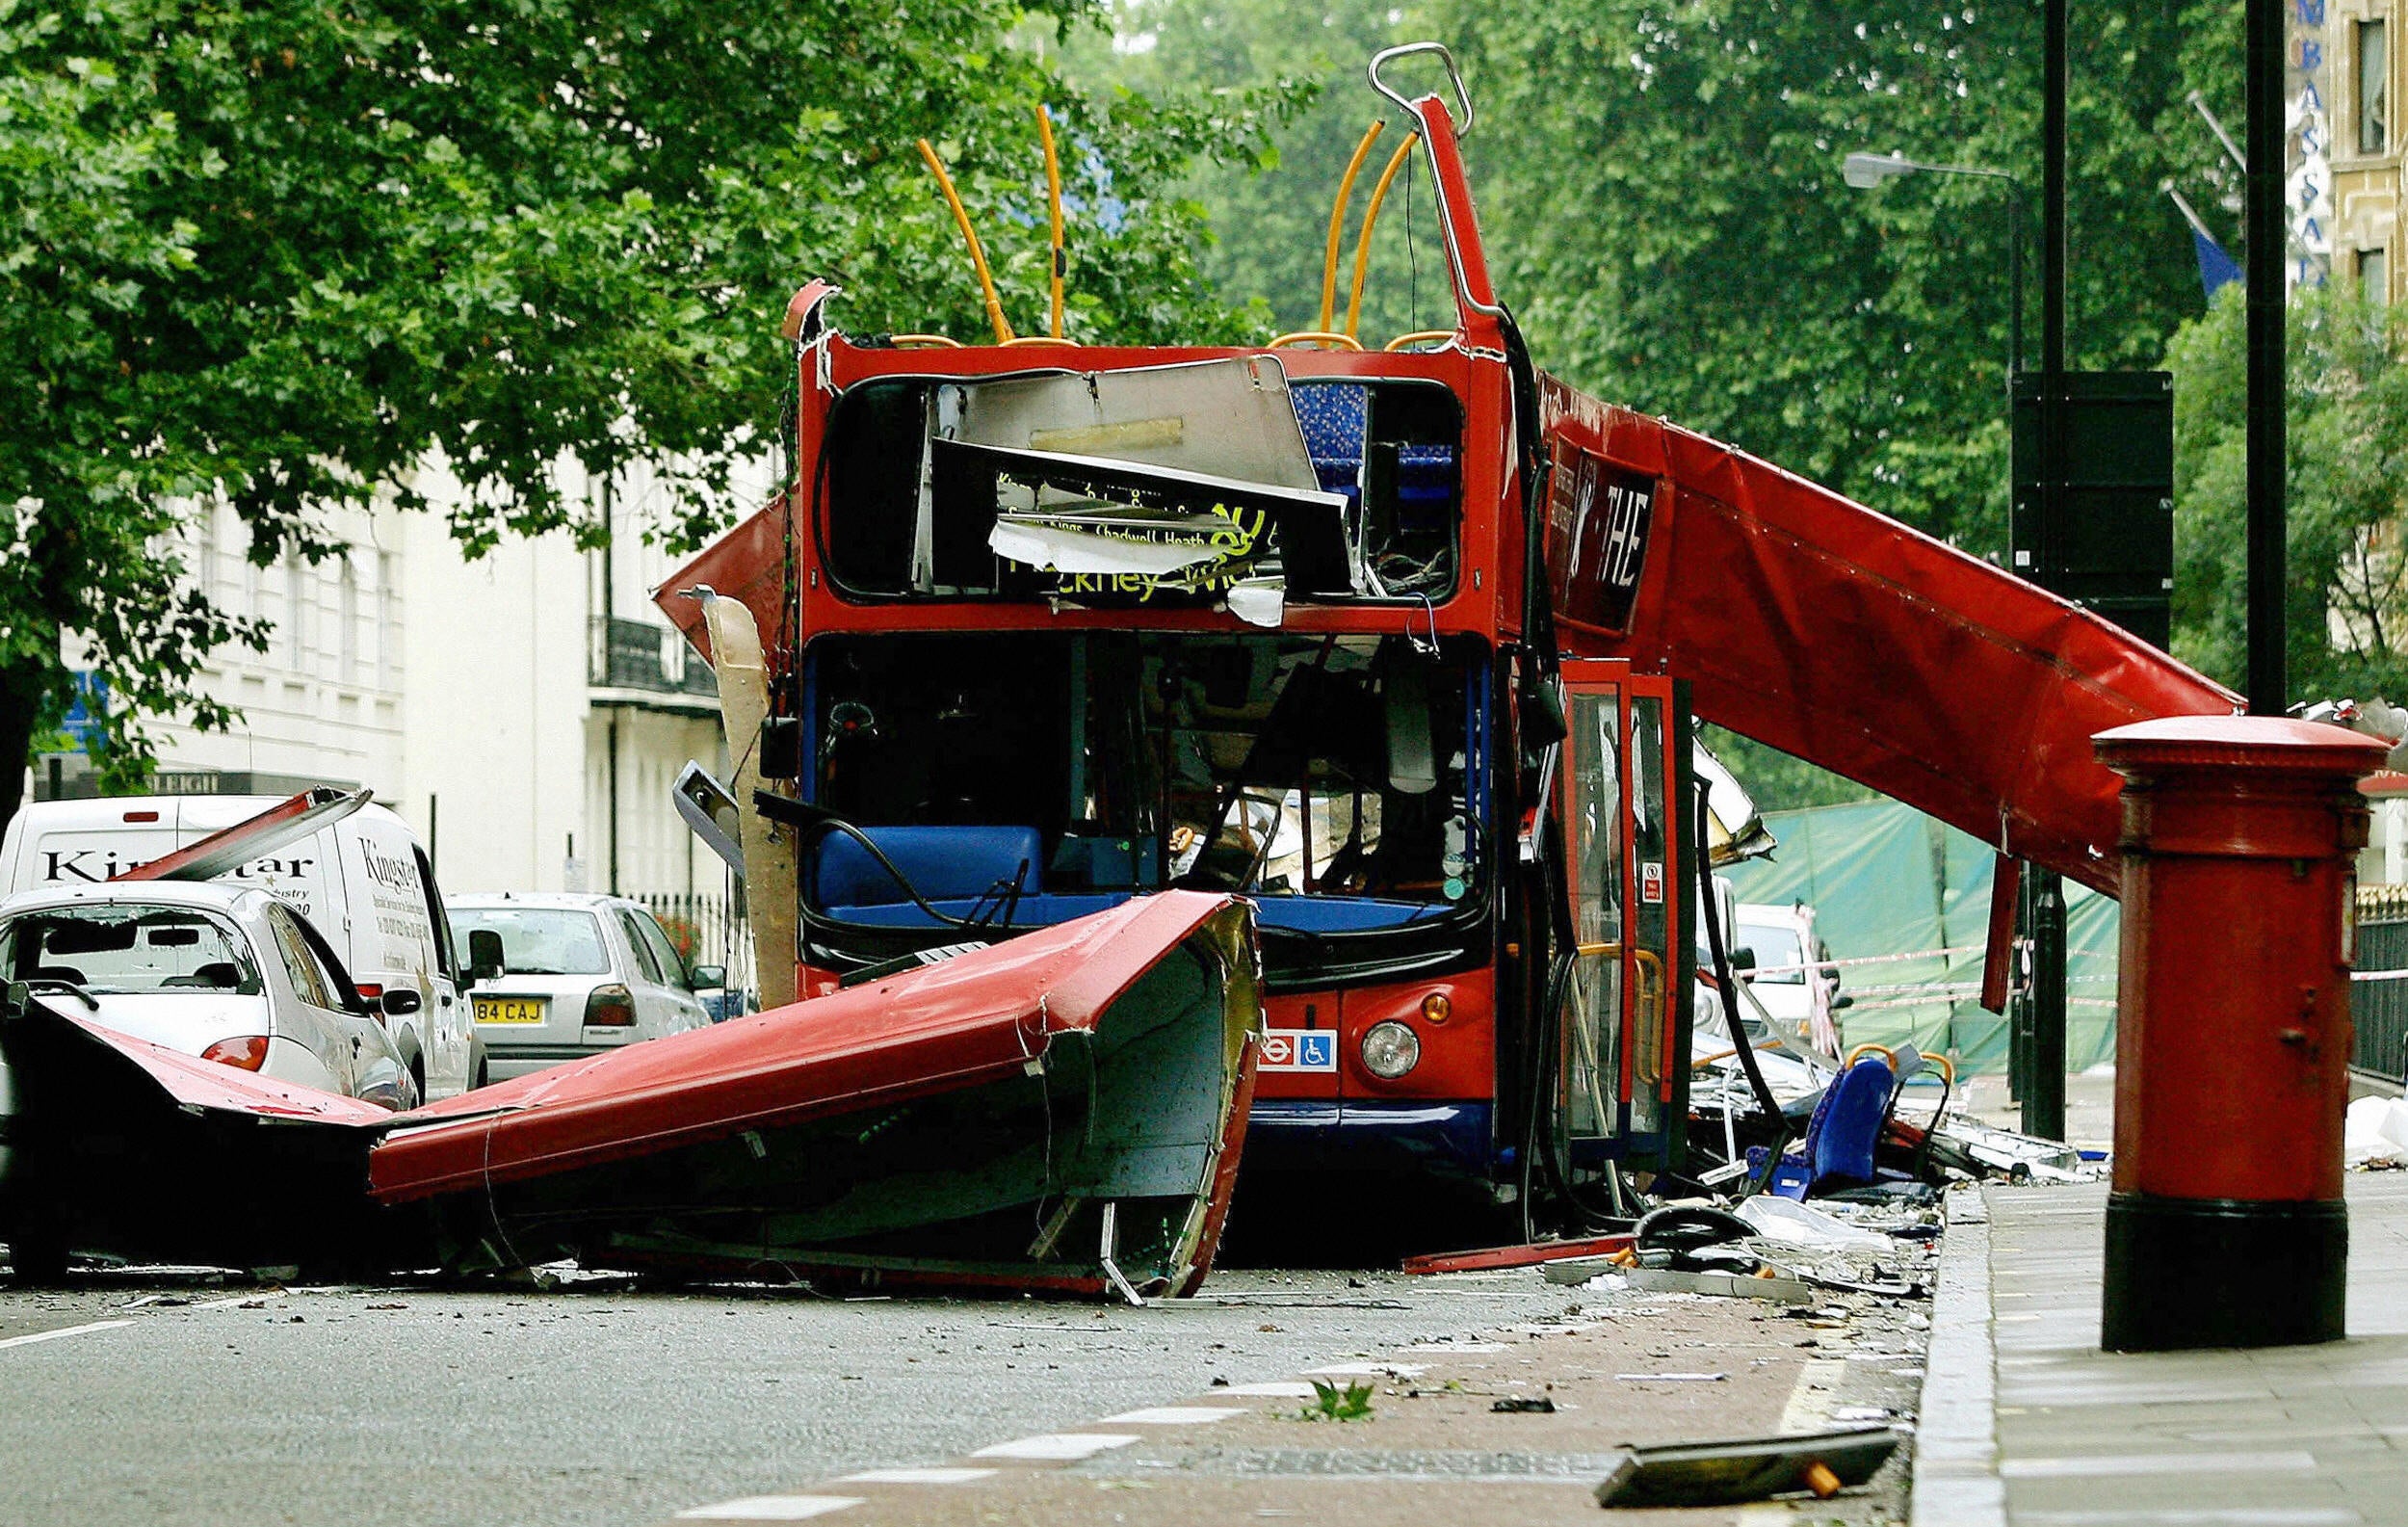 The number 30 bus lies destroyed in Tavistock square on 7 July 2005